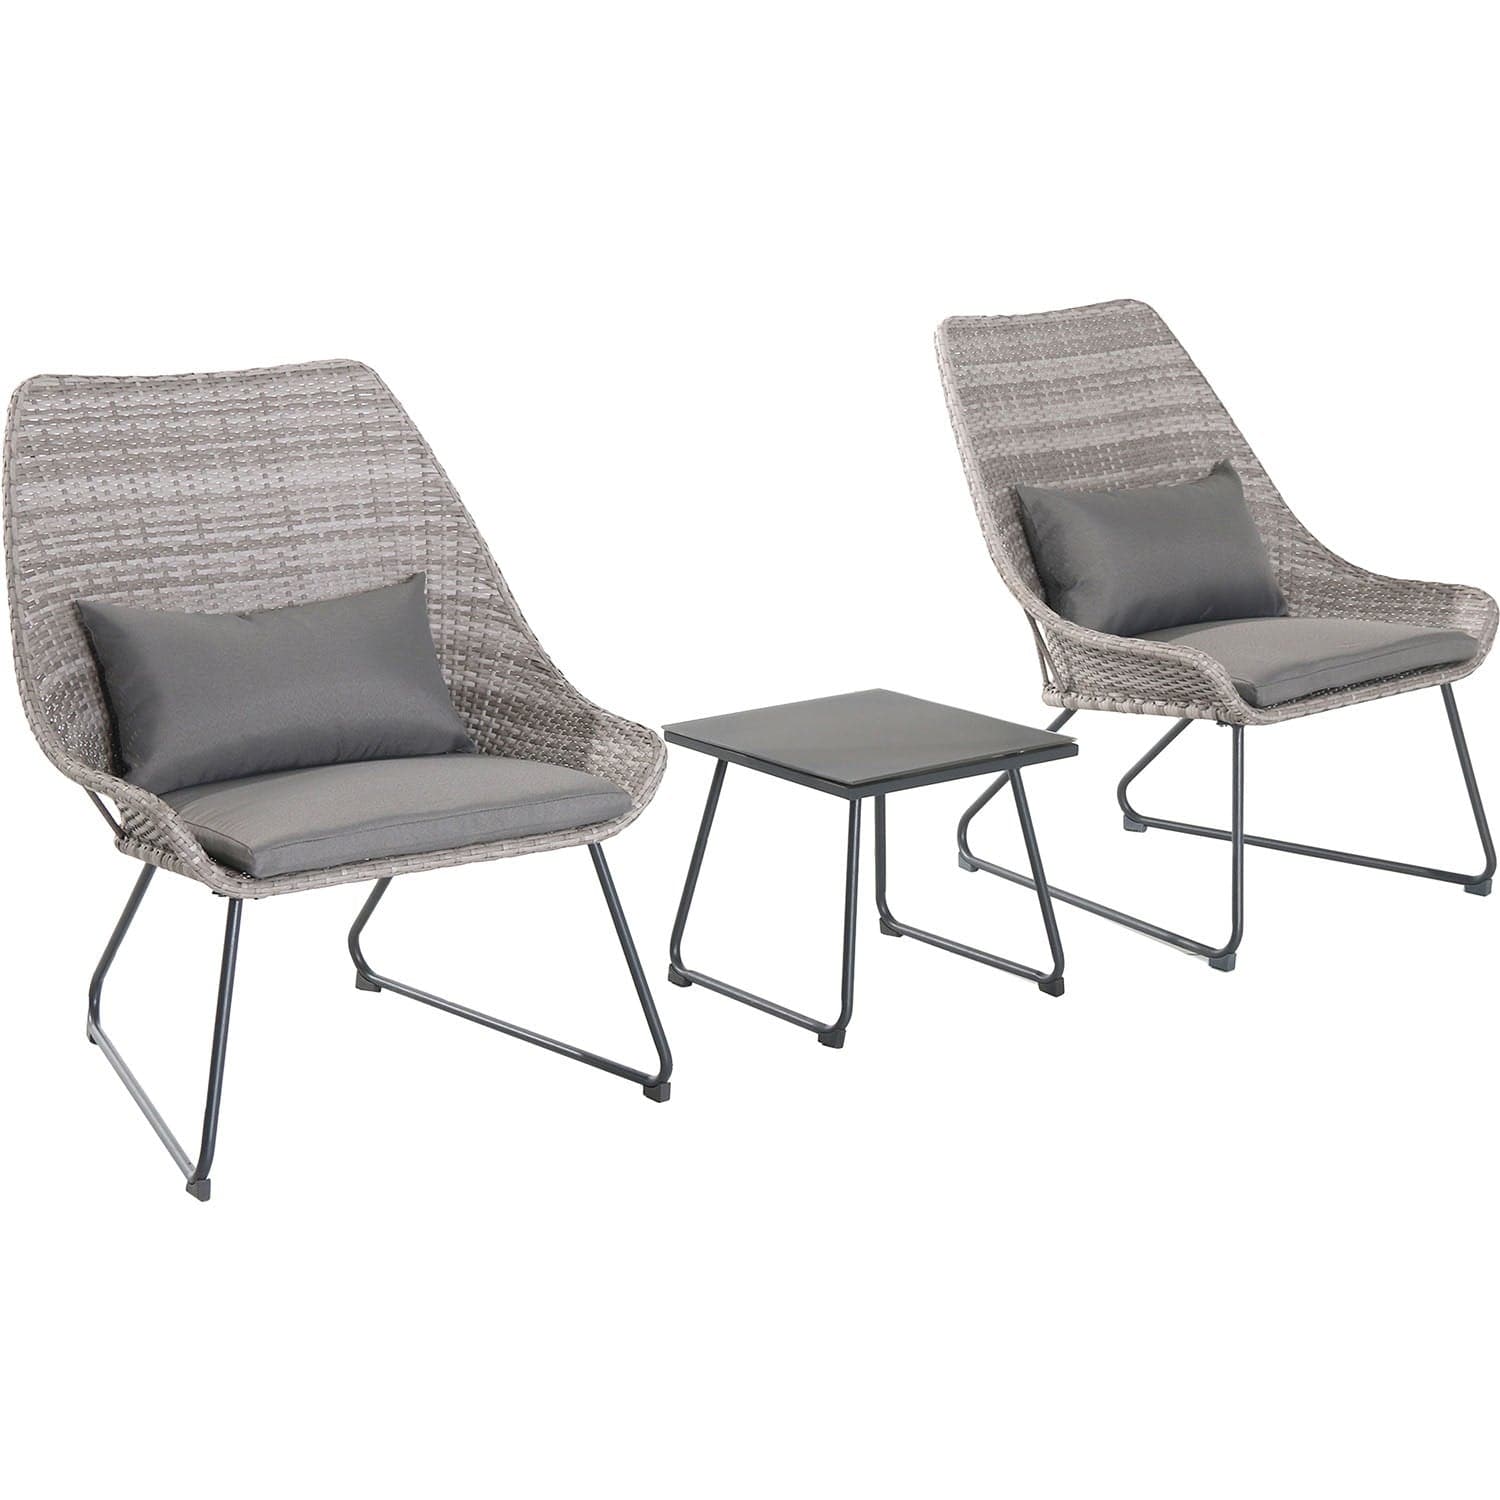 Hanover Conversation Set Hanover 3-Piece Wicker Chat Set | 2 Steel side chairs | Accent table | Gray | ACCENT3PC-GRY